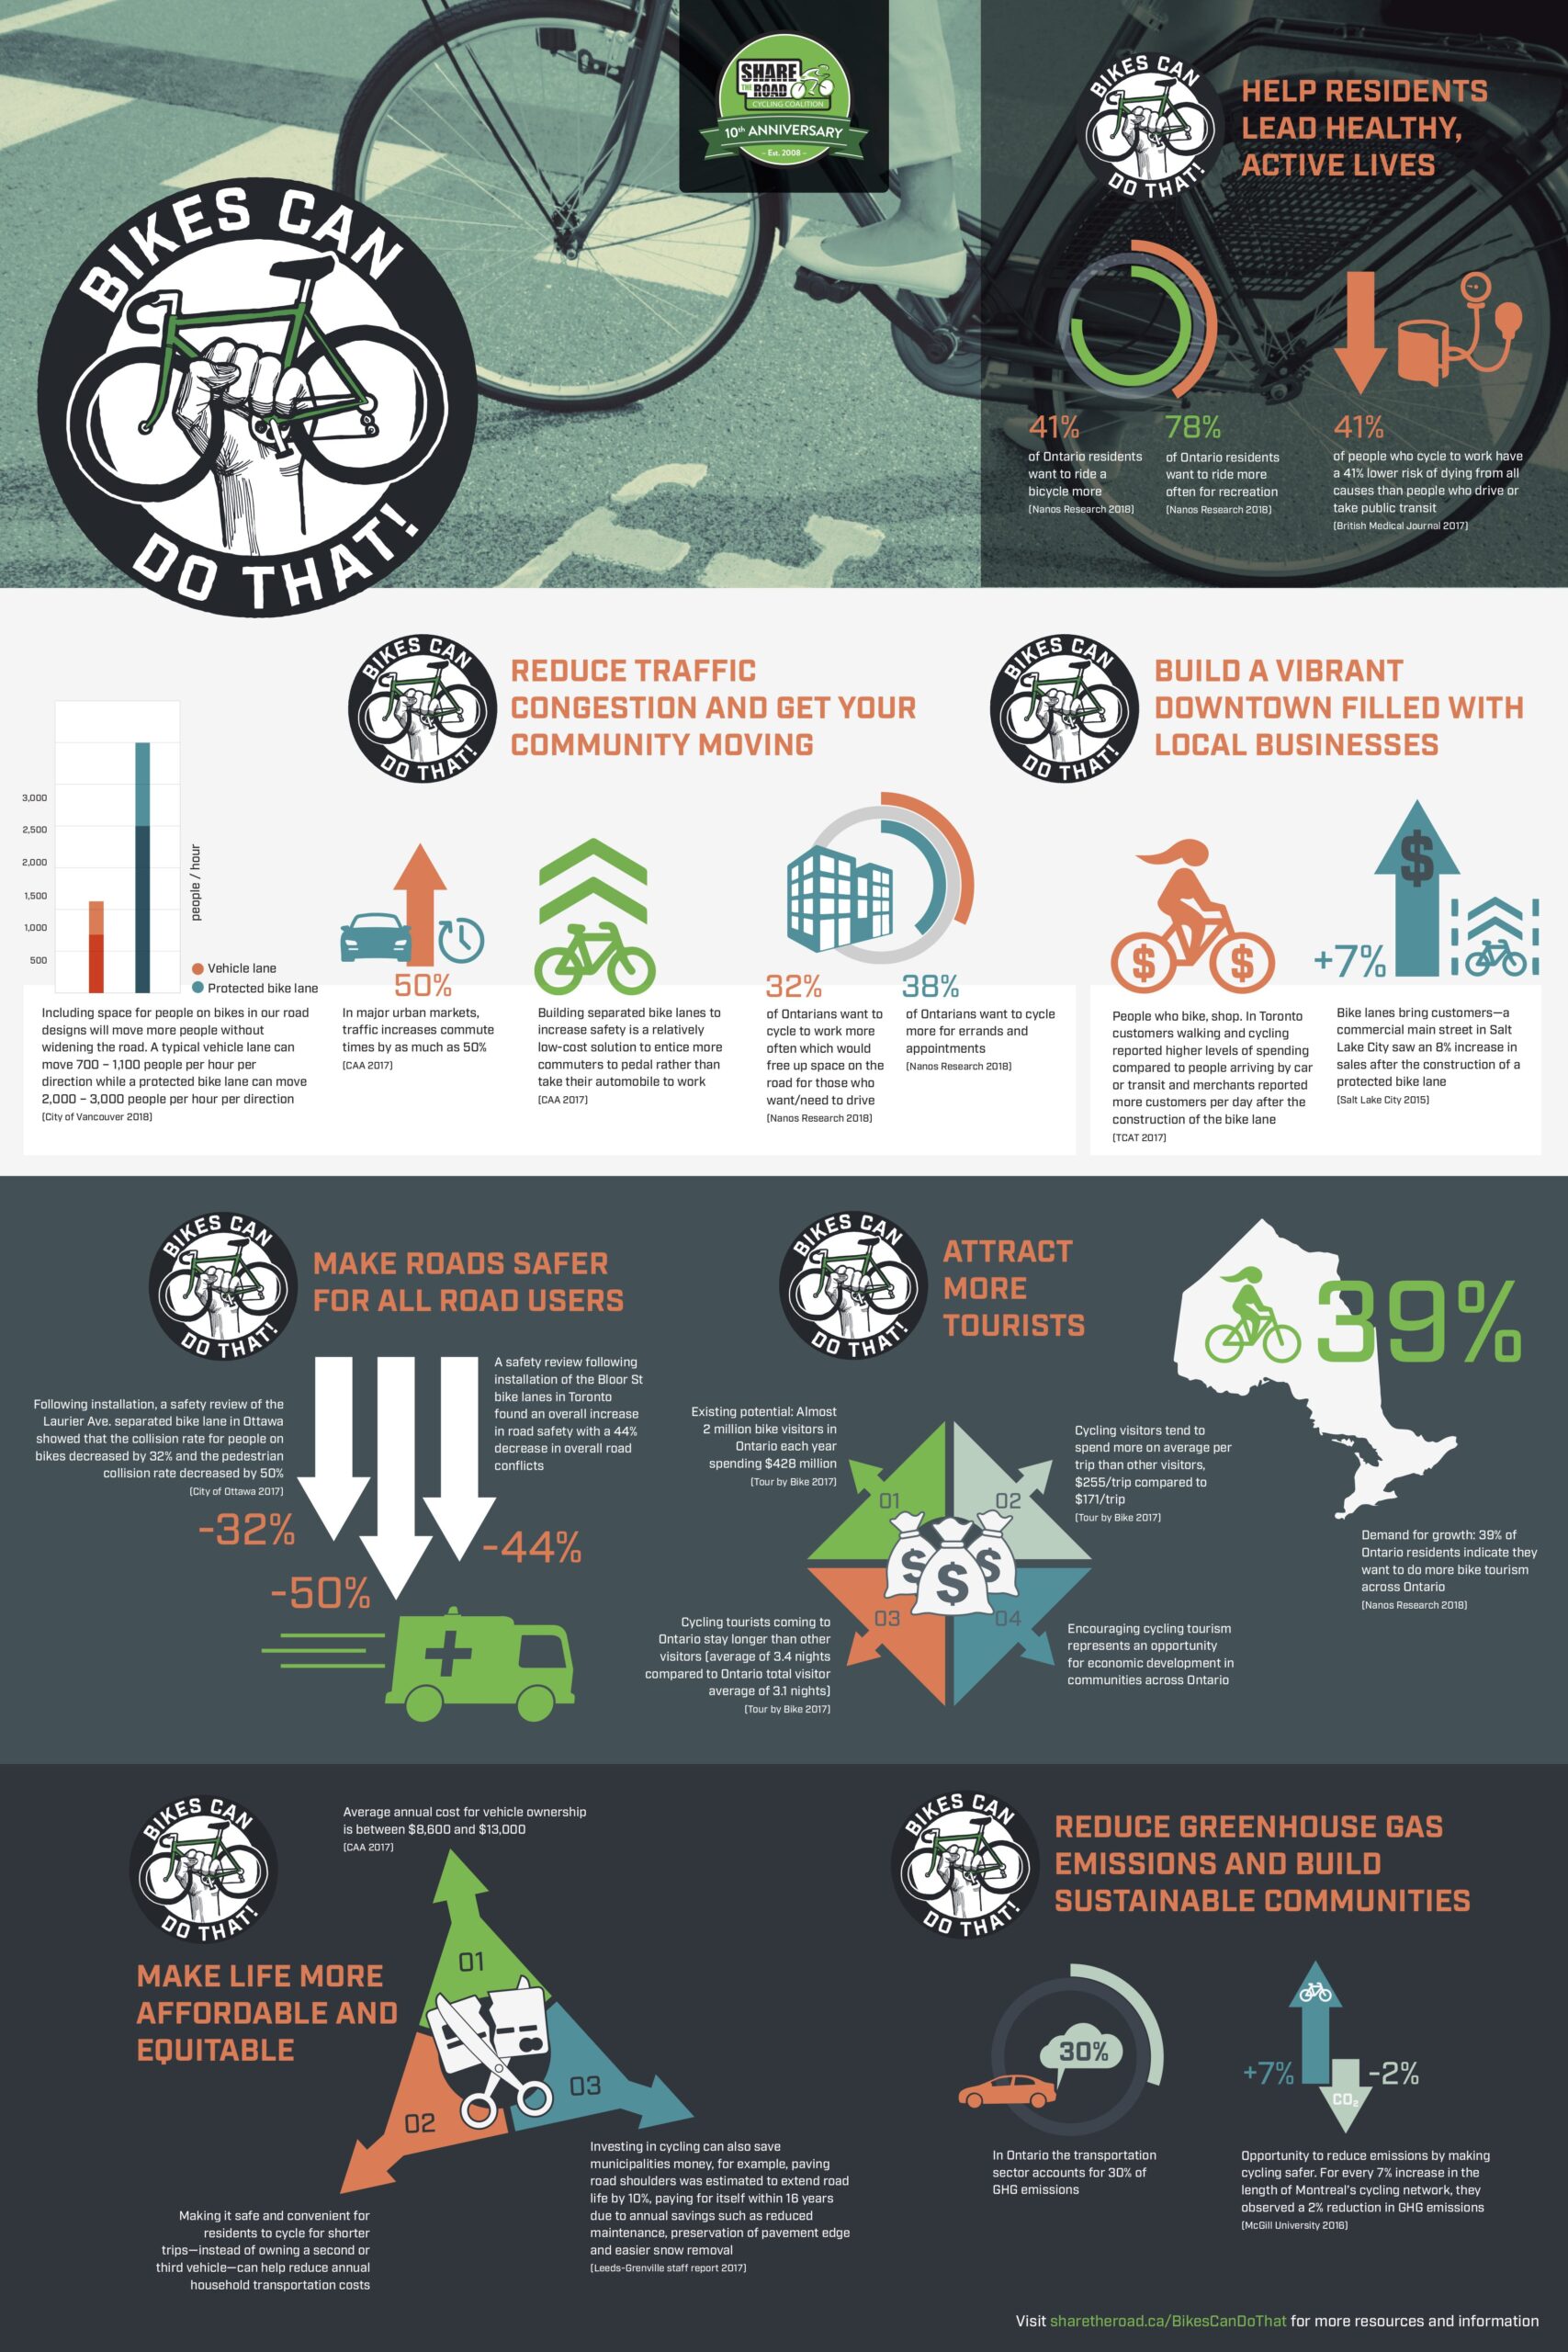 Bikes Can Do That info graphic.